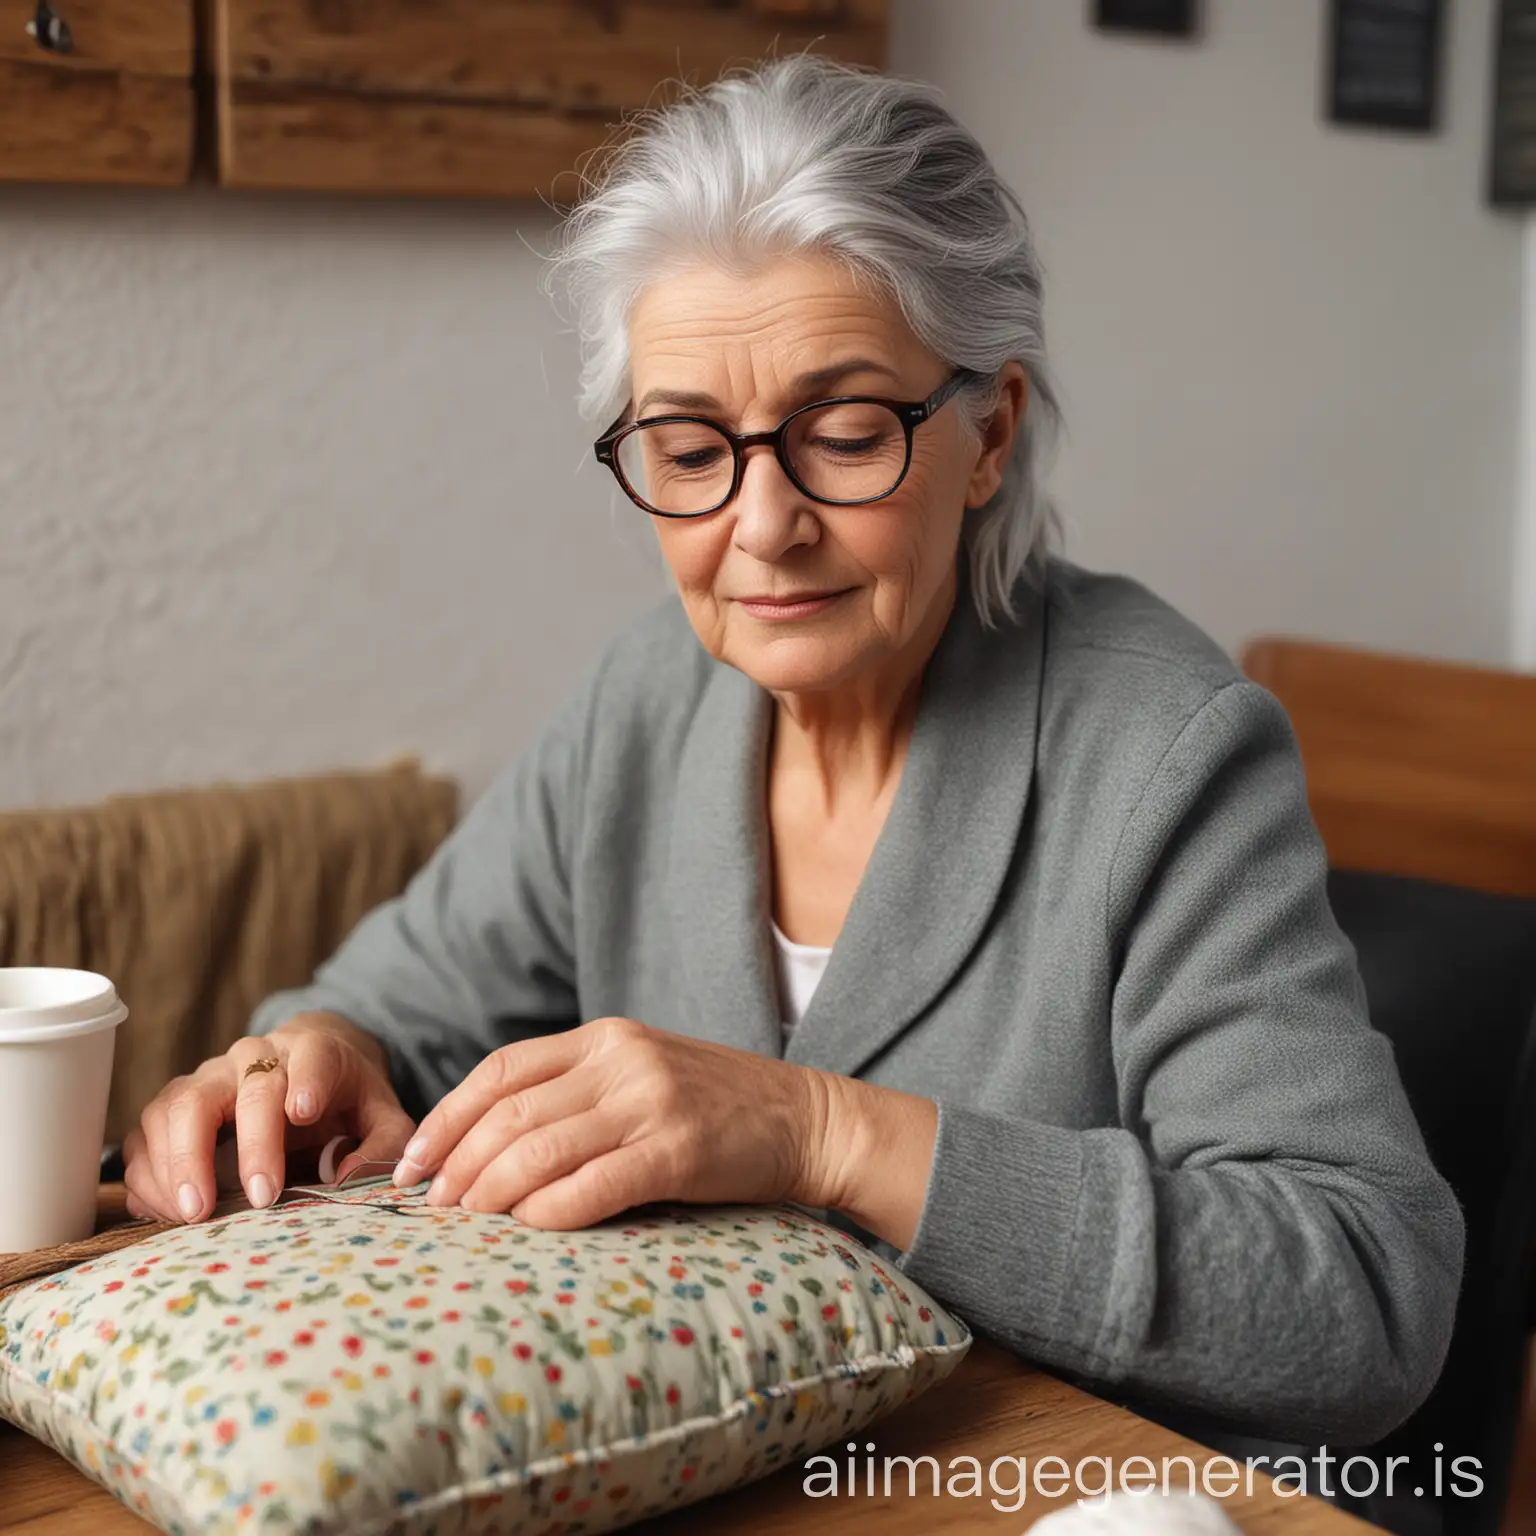 GreyHaired-Woman-Sewing-on-a-Cushion-in-Cozy-Coffee-Shop